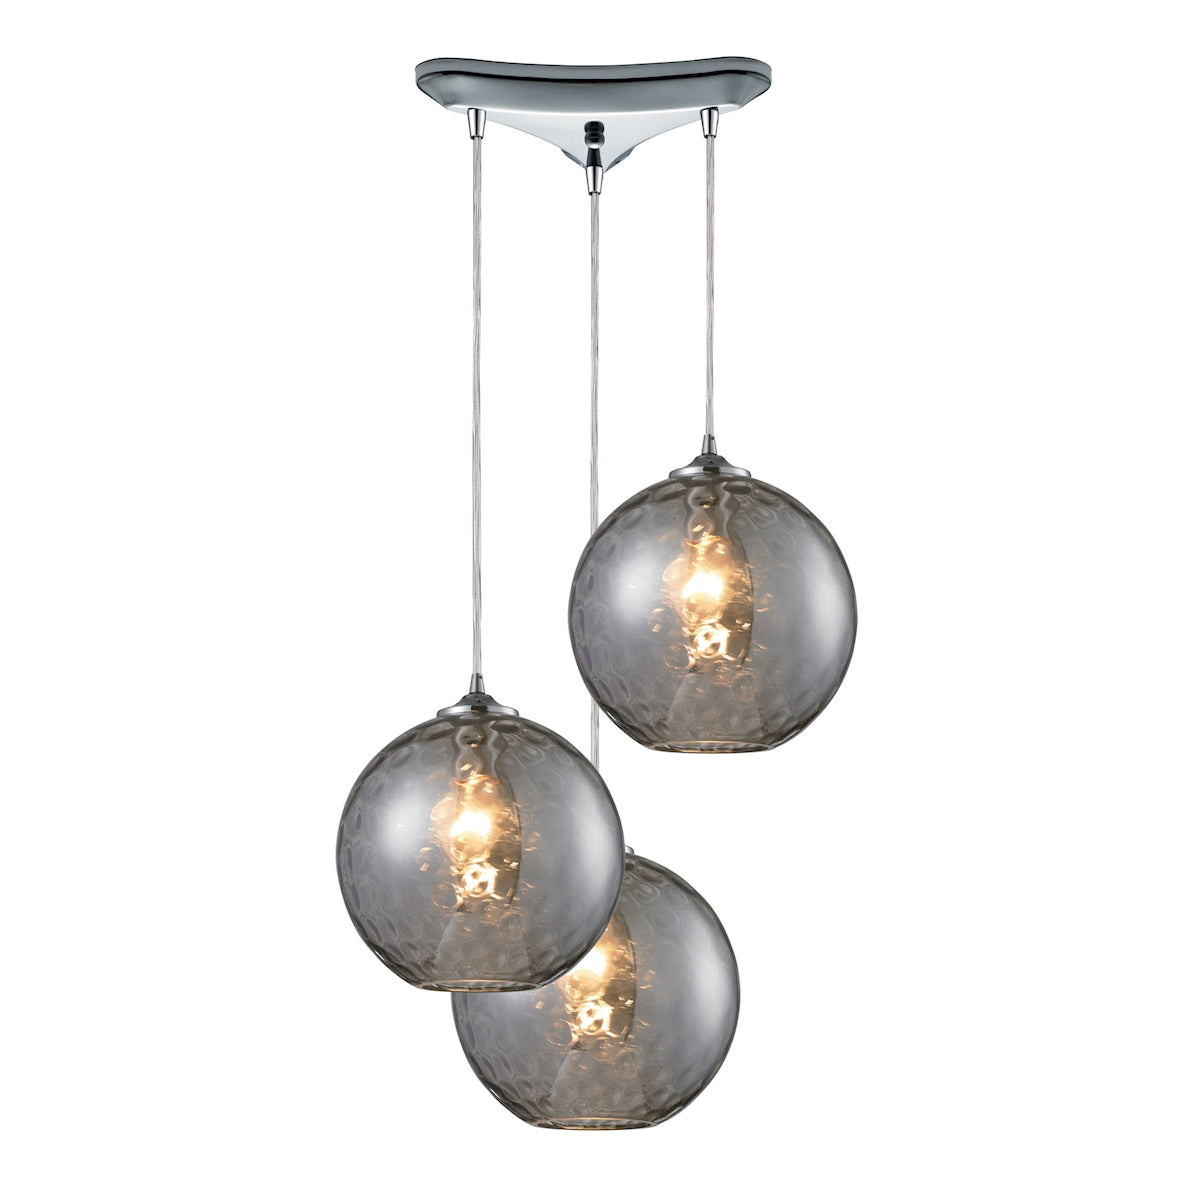 ELK Lighting 31380/3SMK Watersphere 3-Light Triangular Pendant Fixture in Chrome with Hammered Smoke Glass